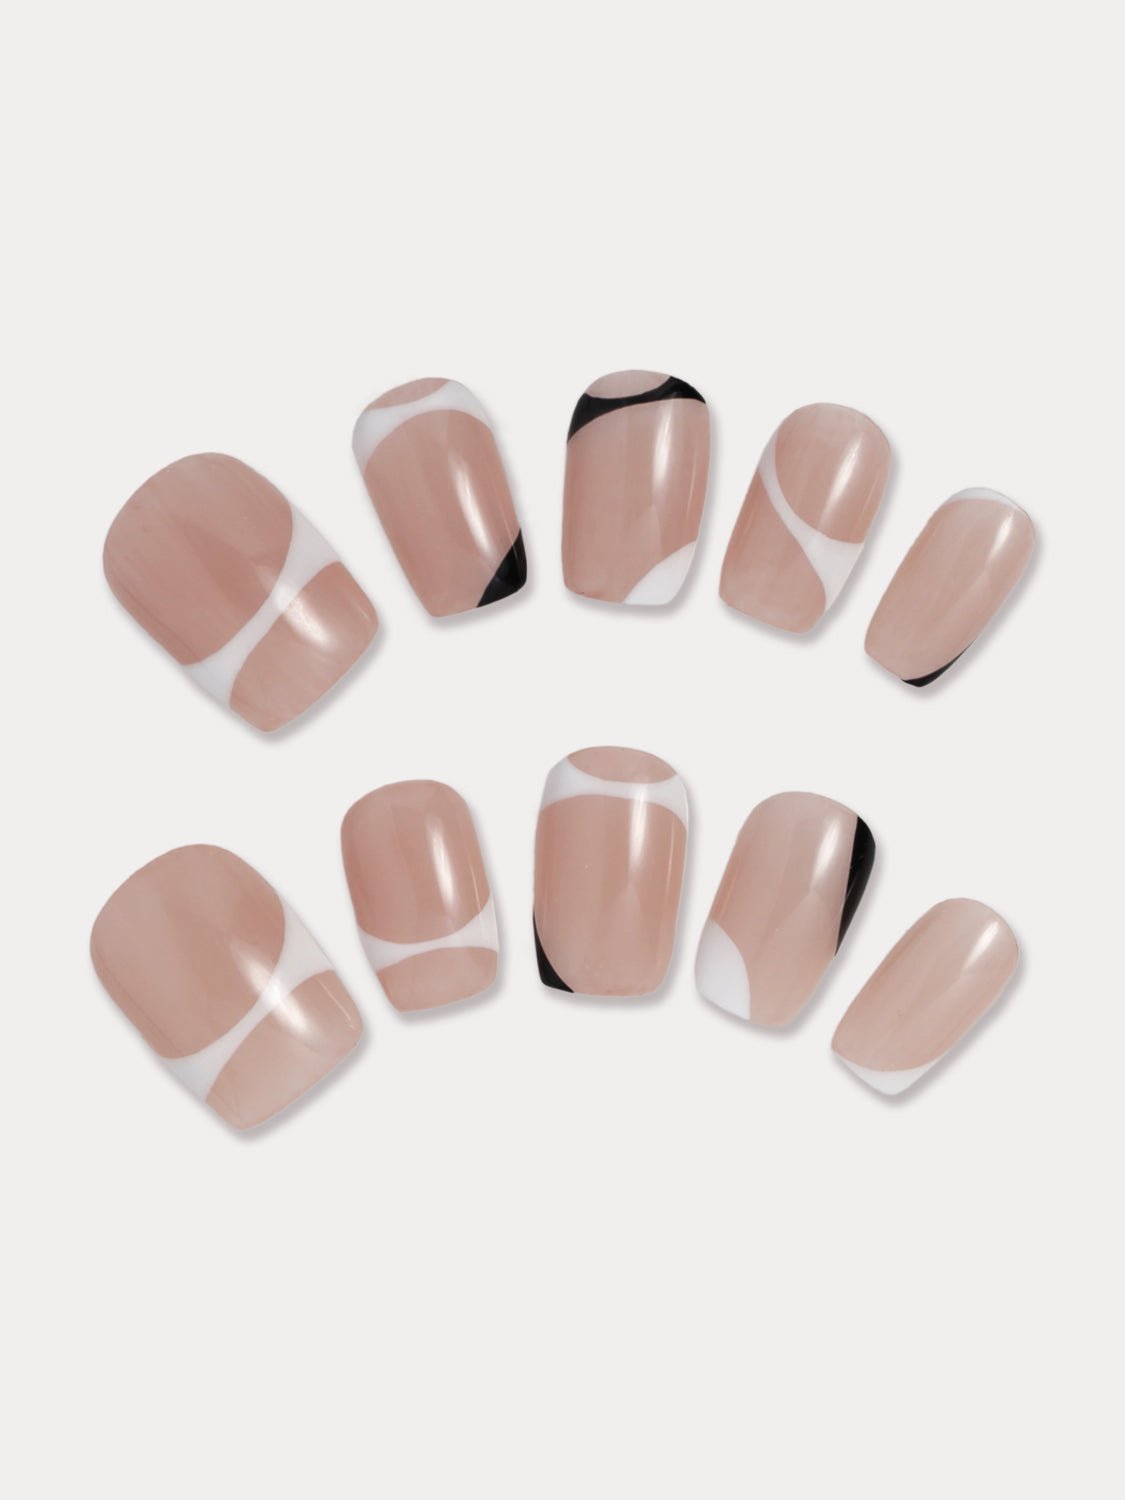 MIEAP Black and White Pattern press on nail set is perfect for the office. Its classic, irregular-shaped design features a black and white pattern overlay on a nude-colored base. The short square shape adds practicality for everyday use. #MIEAP #MIEAPnails #pressonnail #falsenail #nailsart #naildesigns #nailinspo #handmadenail #summernail #nail2023 #classicnail #shortnail #shortsquarenail #nudenail #whitenail #blacknail